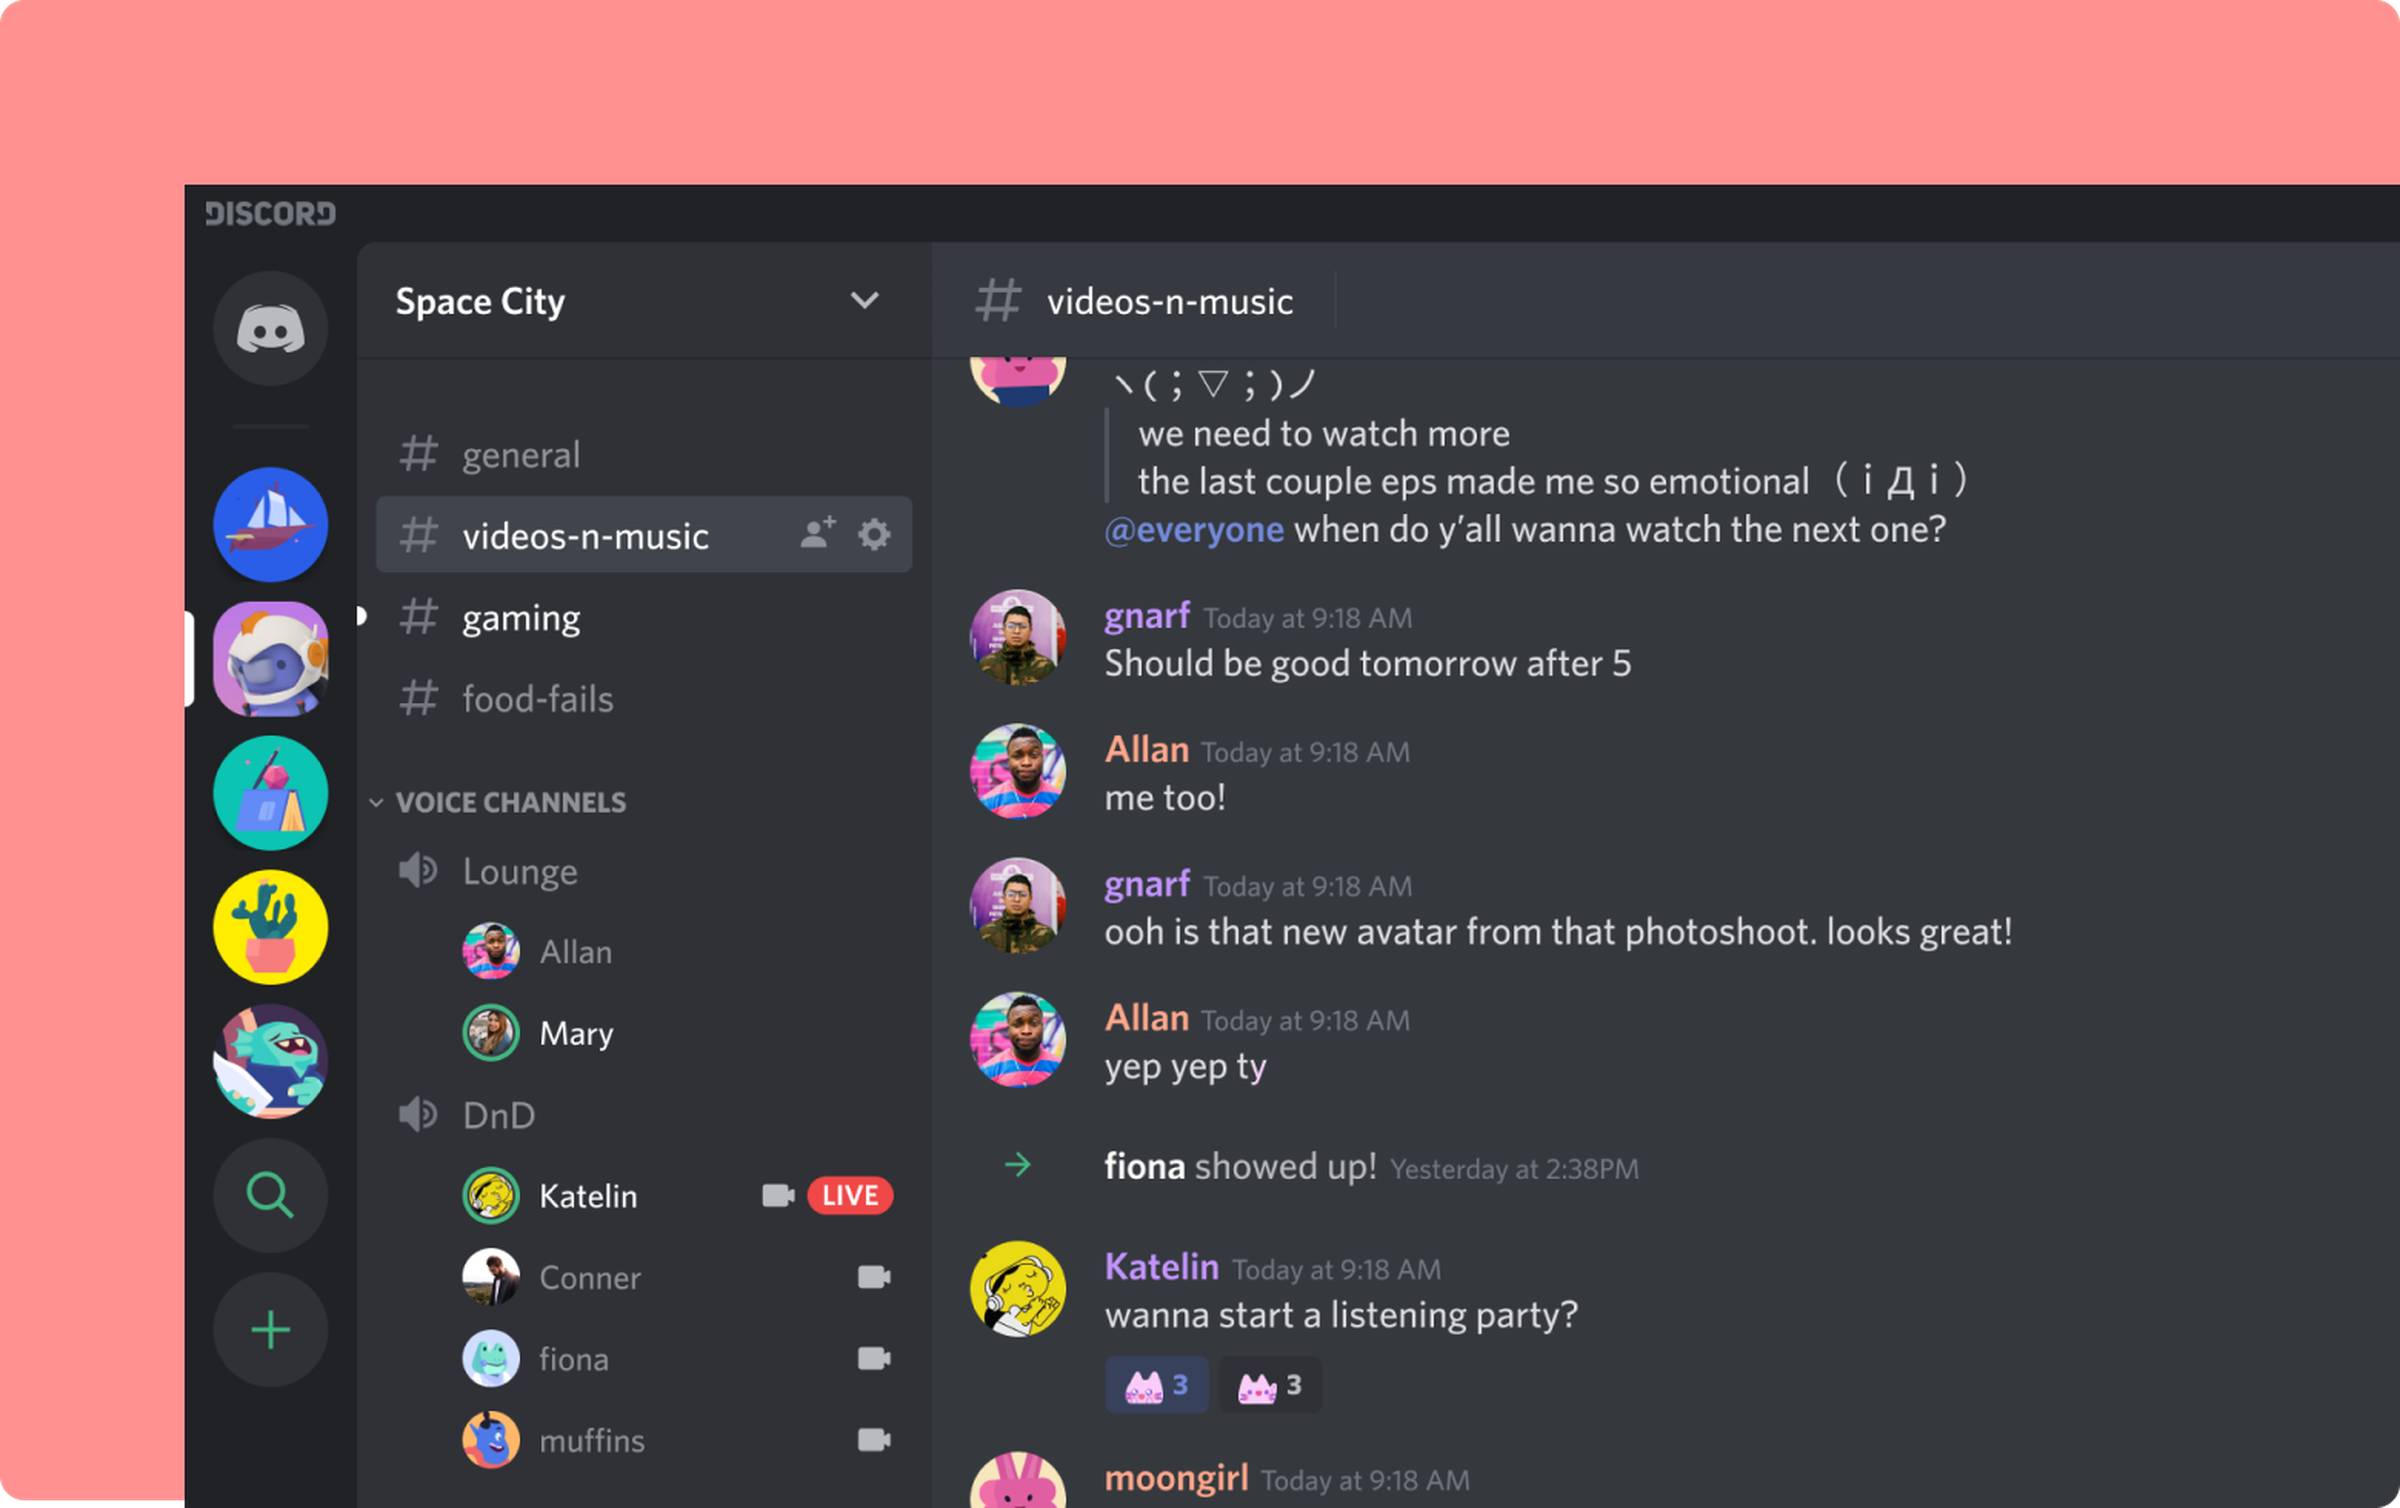 Discord’s easy drop-in chat has made it popular among gamers.